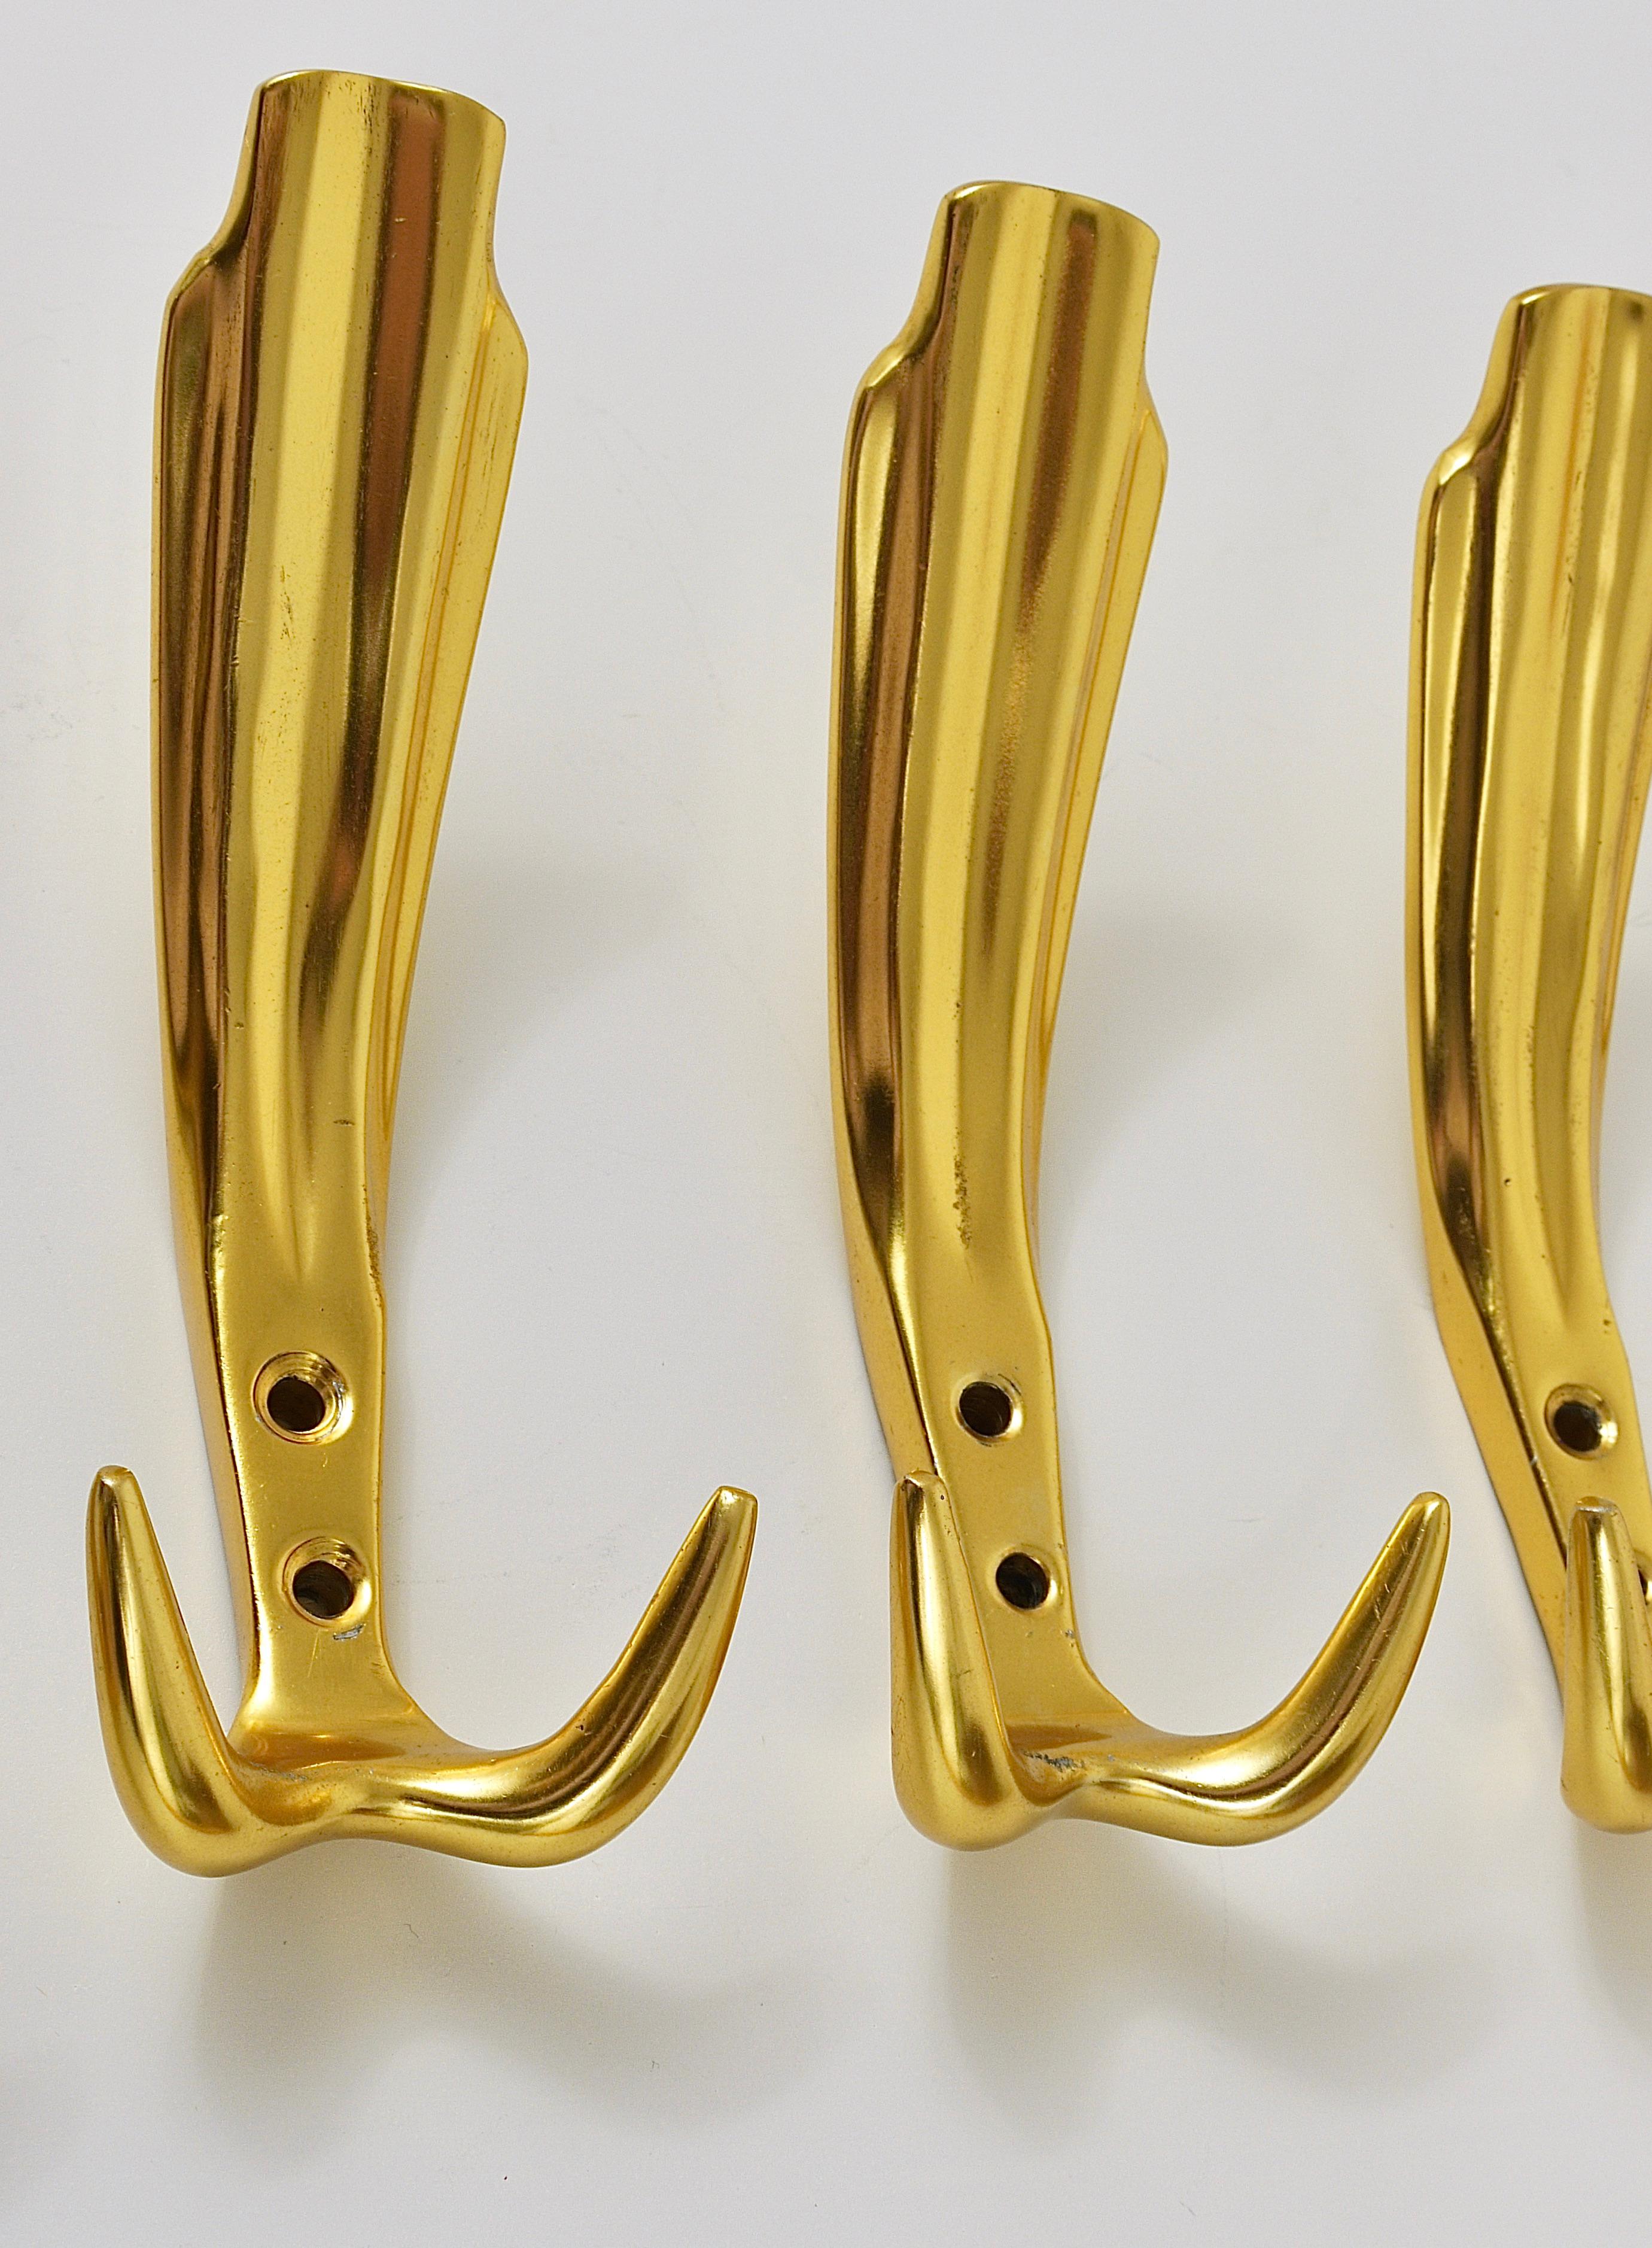 Up to Five Golden Hollywood Regency Wall Coat Hooks, Italy, 1970s For Sale 7